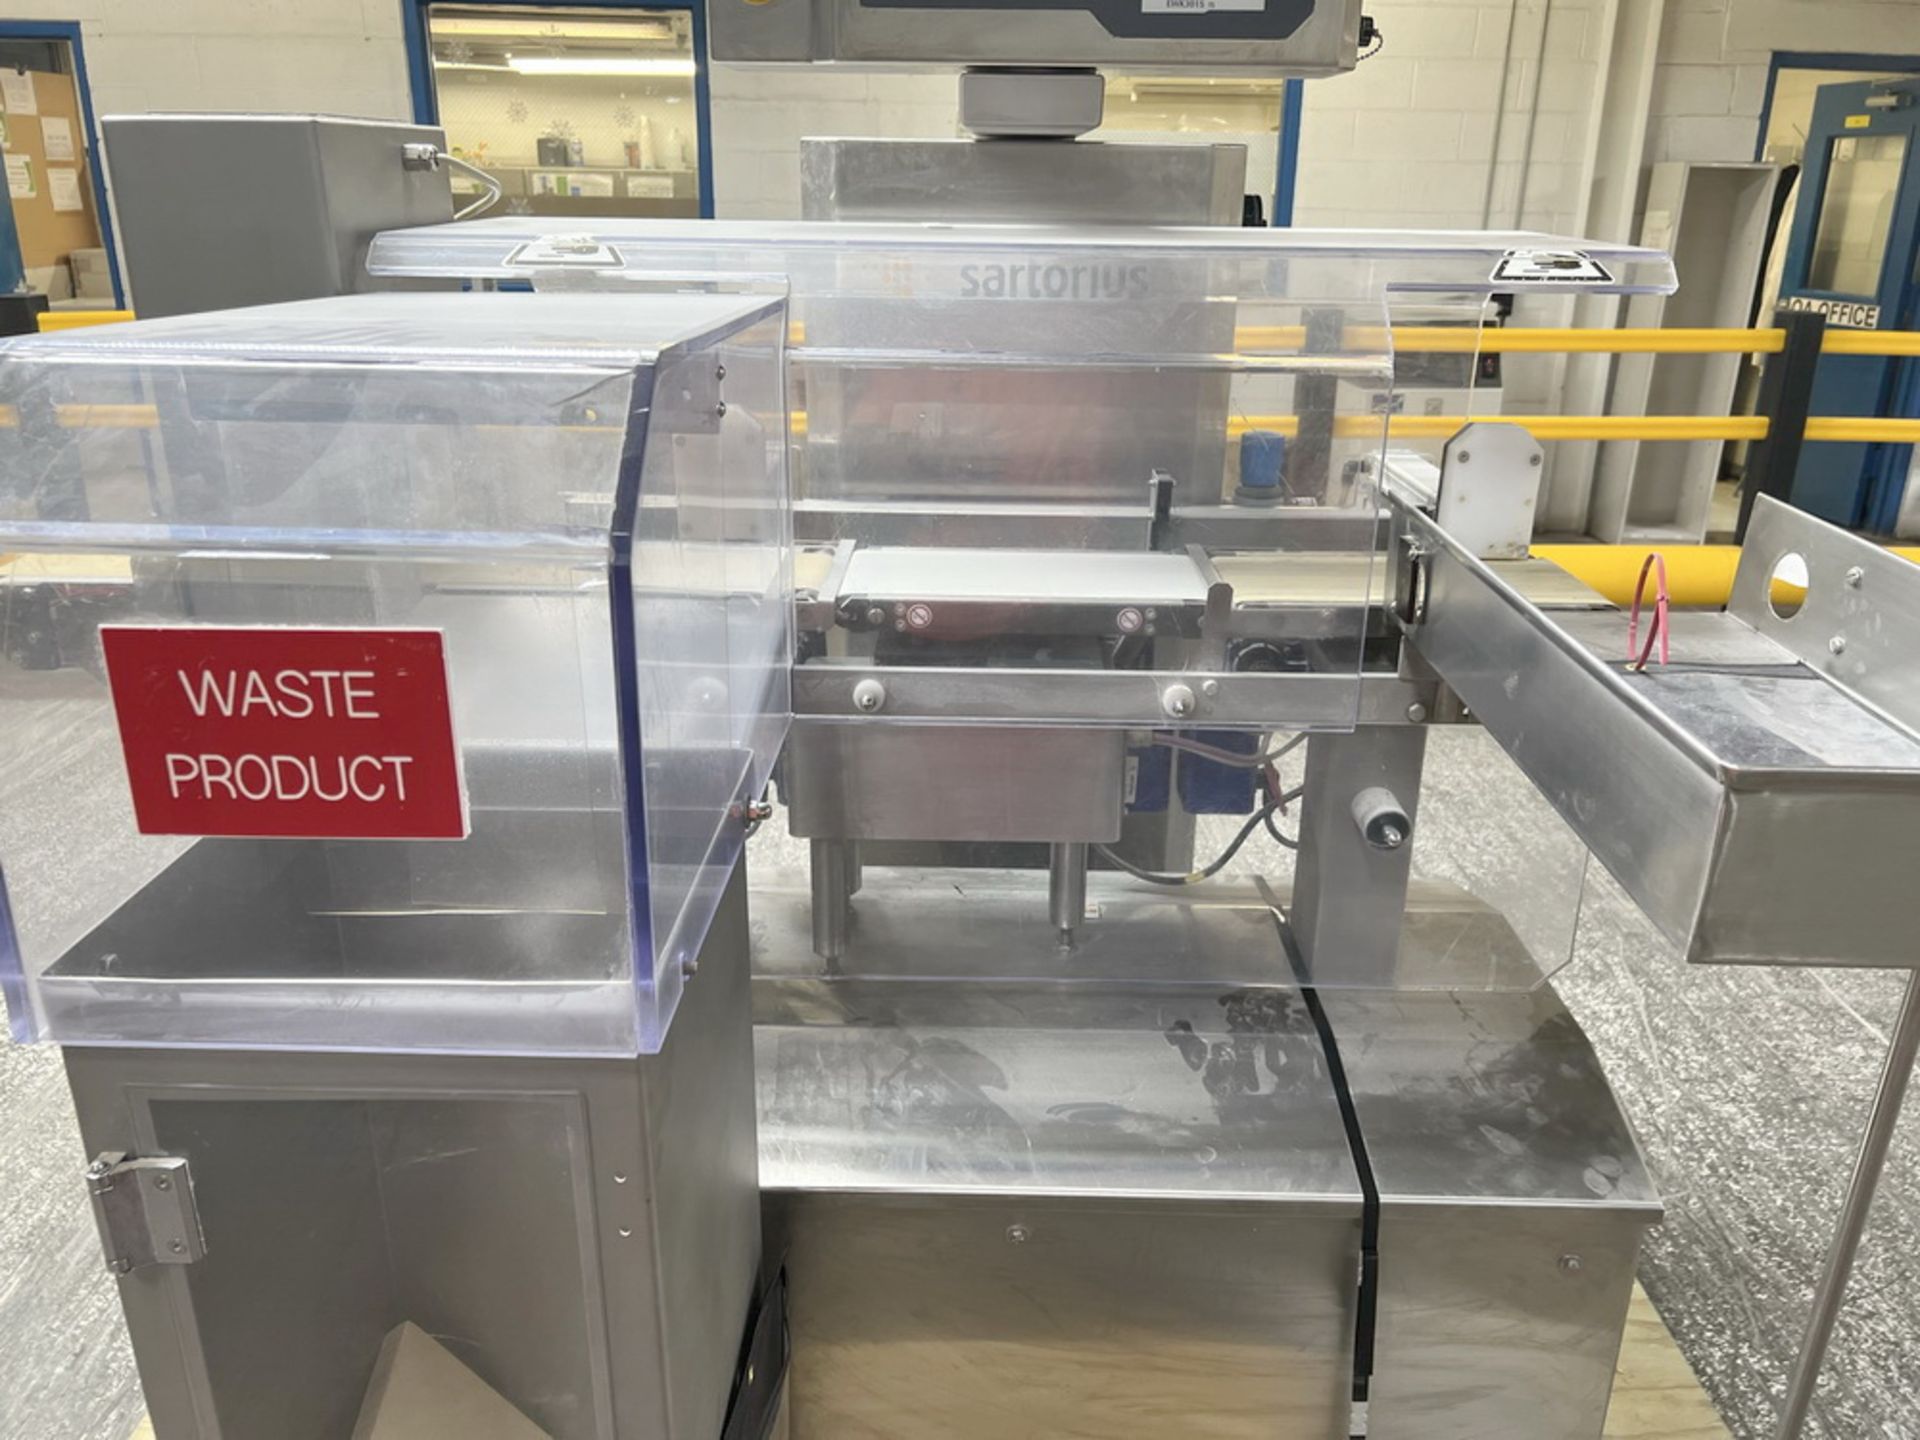 Sartorius Metal Detector and Checkweigher Combo - Image 12 of 12